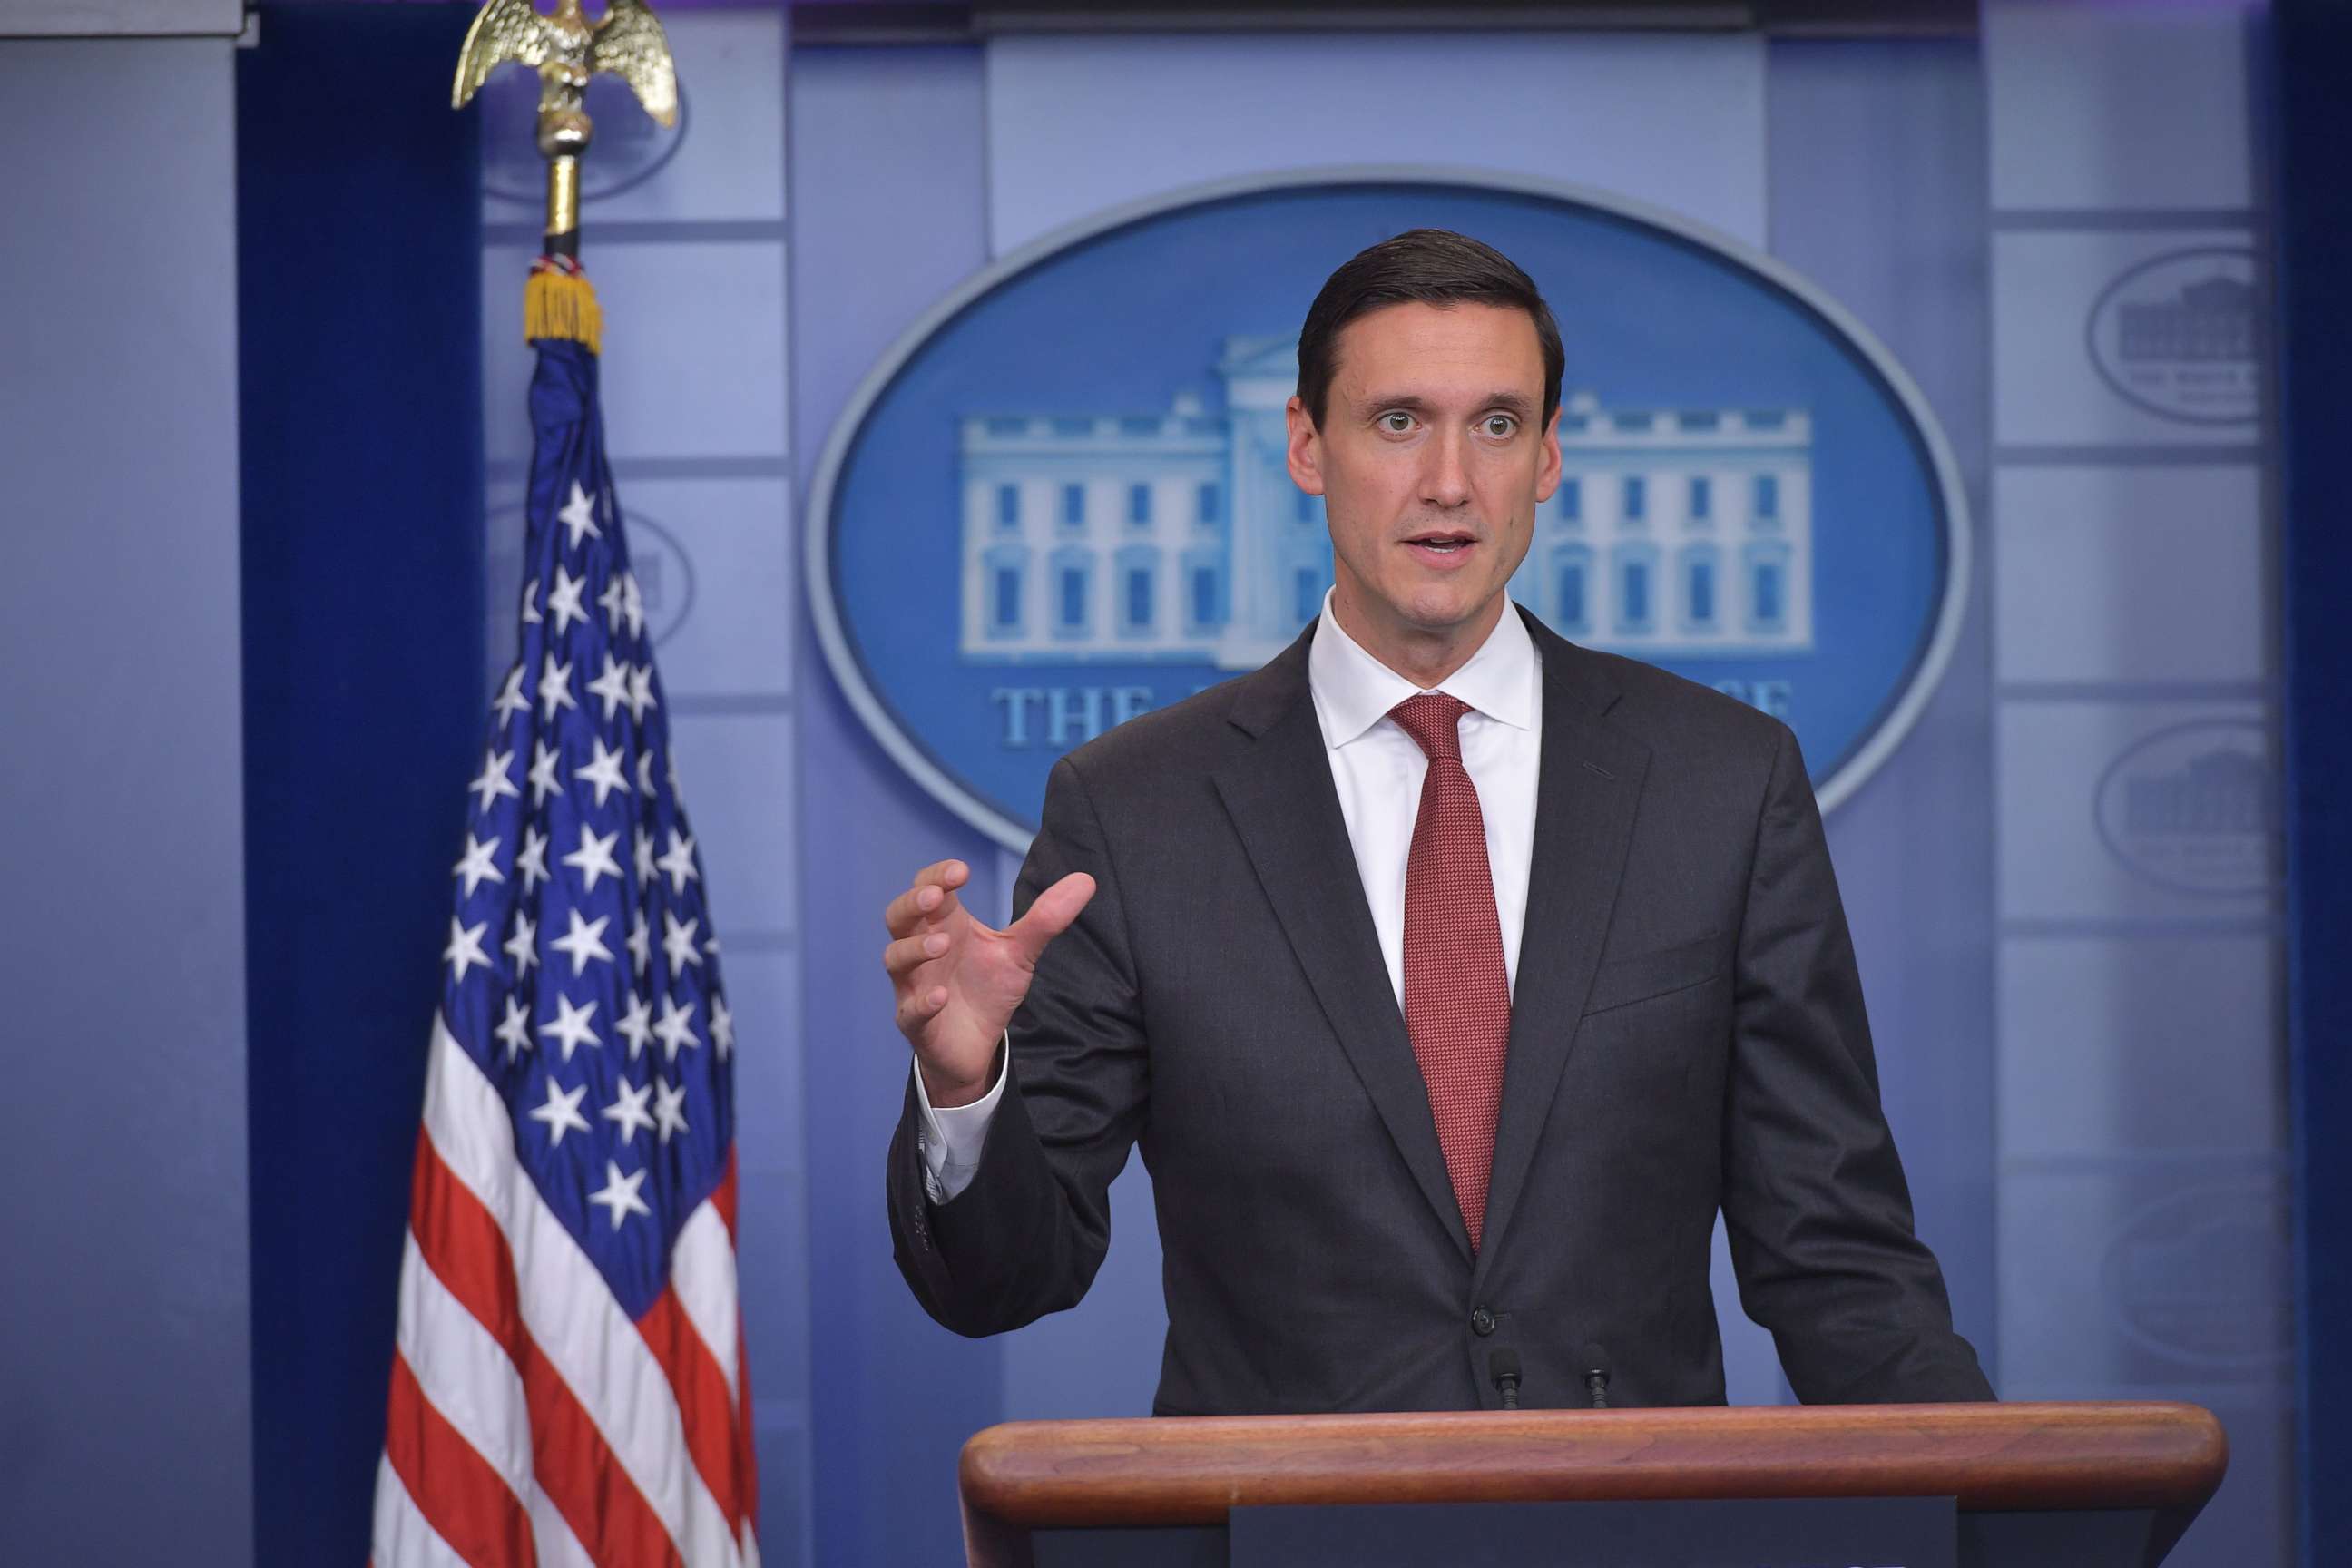 PHOTO: Homeland security advisor Tom Bossert speaks during a press conference in the Brady Briefing Room of the White House, Sept. 8, 2017, in Washington.